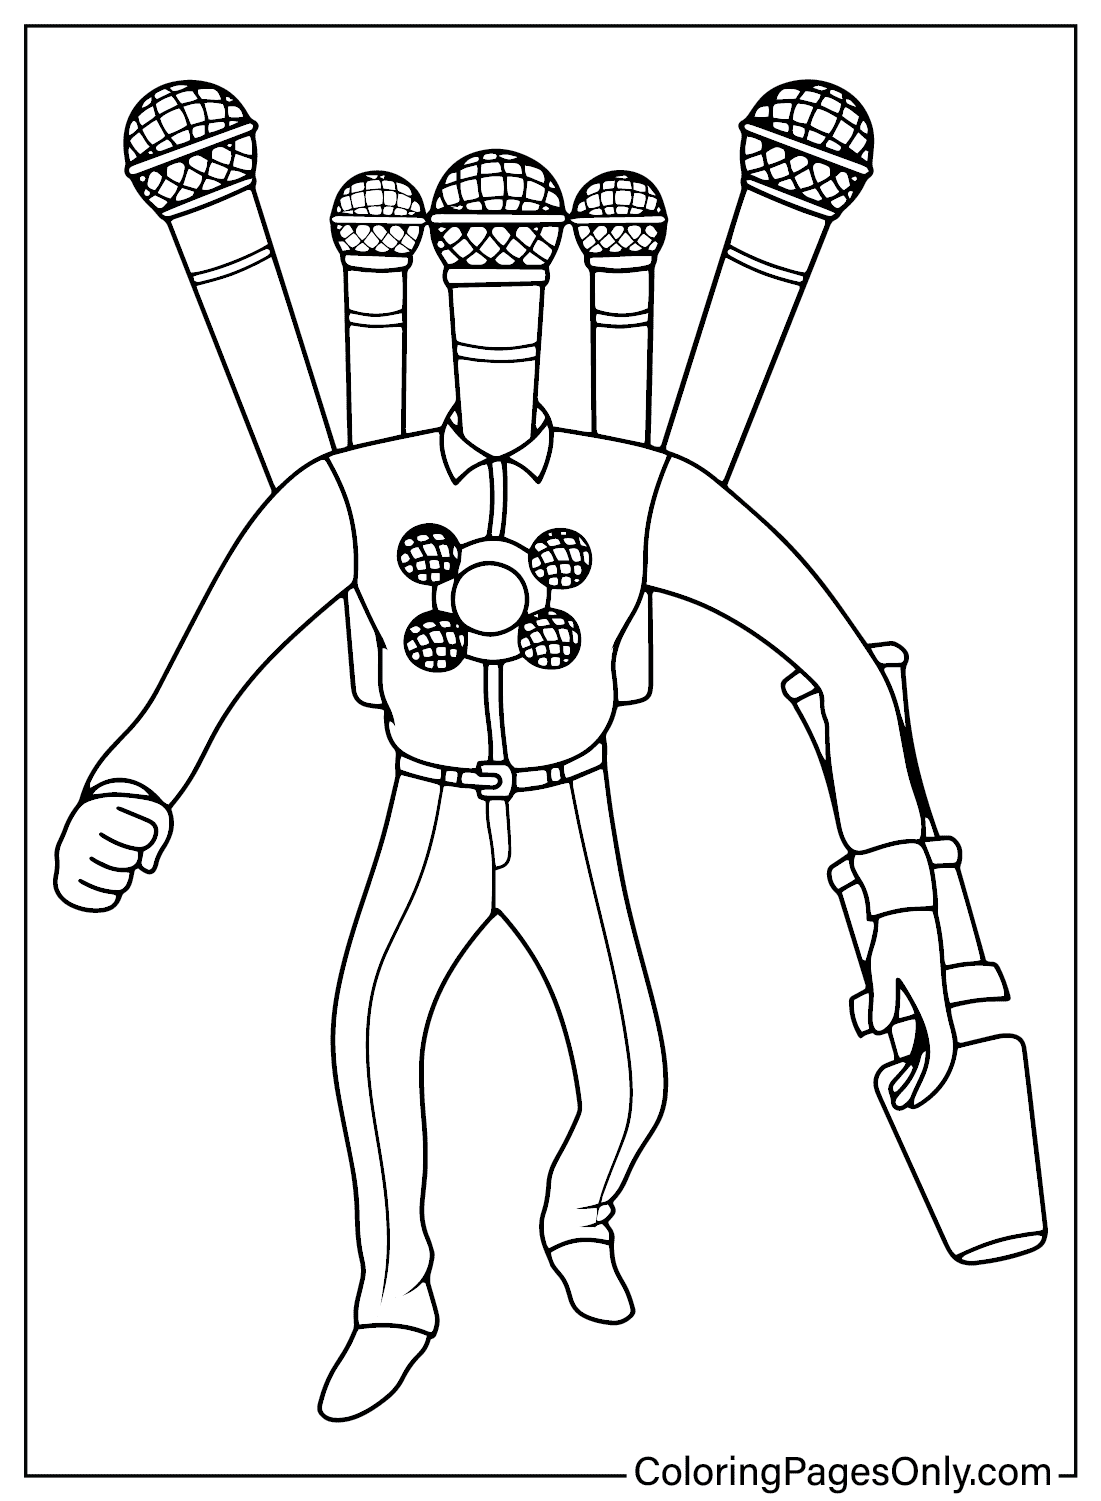 Coloring Page Microphone Mecha Boss from Microphone Mecha Boss